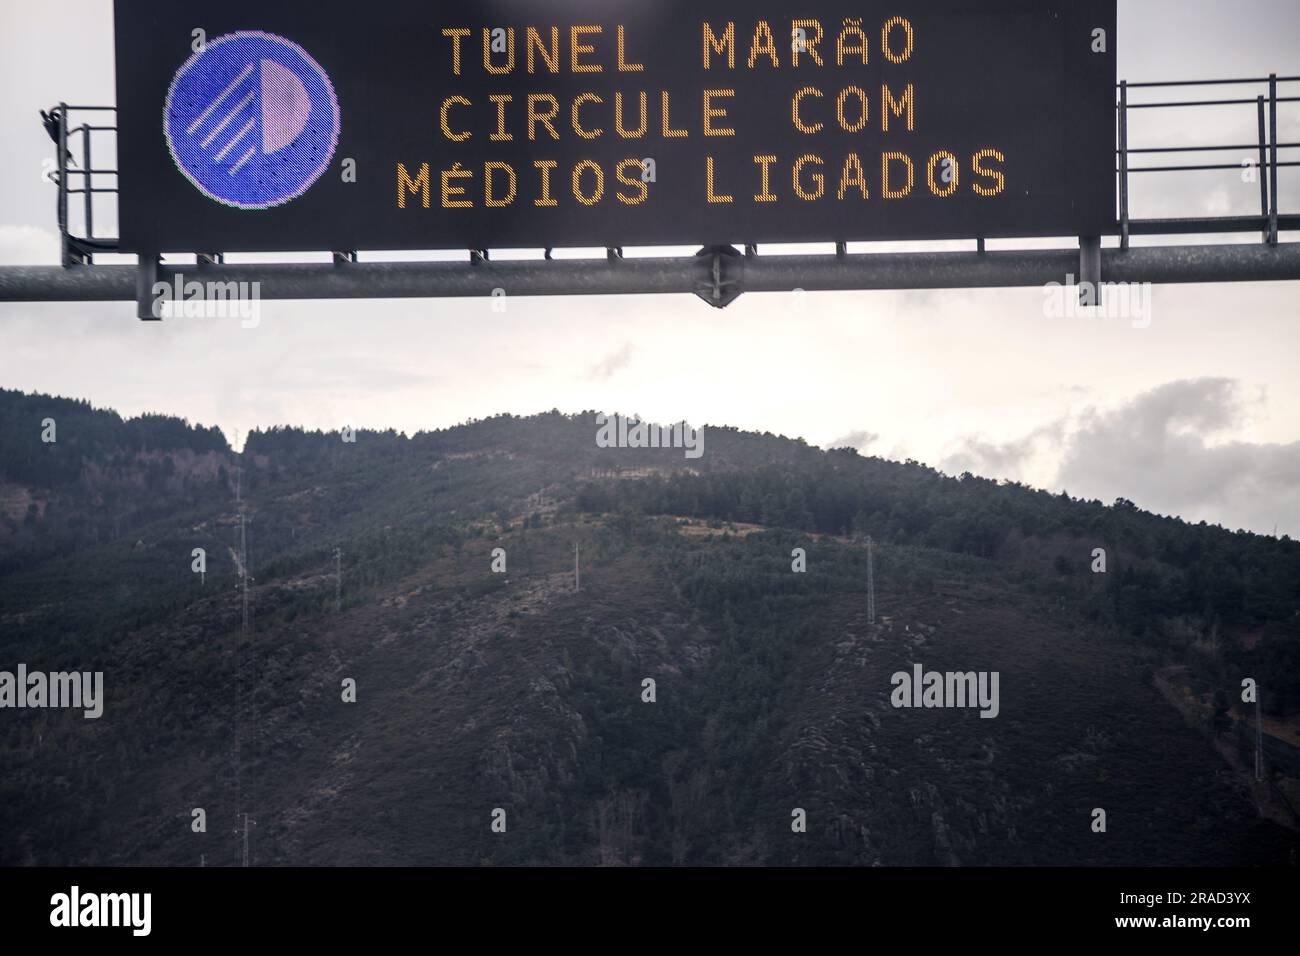 A4 motorway, before entering the Marao tunnel, Amarente - Vila Real. Luminous signage board. 'Marao Tunnel Works. Be prudent.' Stock Photo